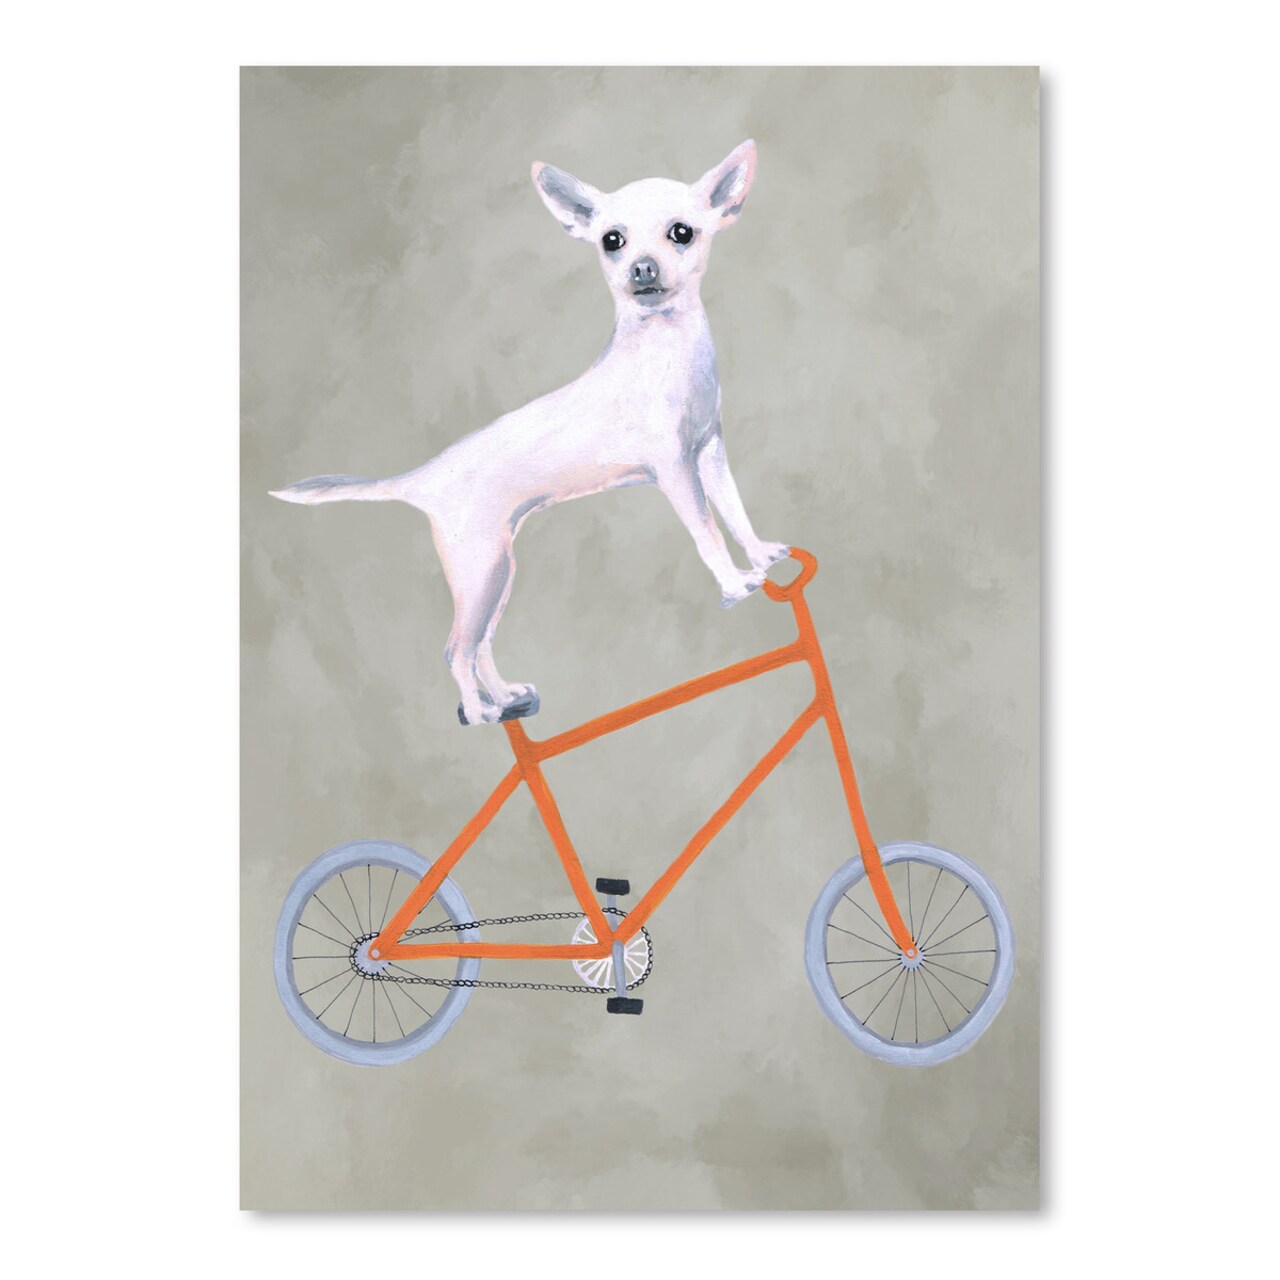 Chihuahua On Bicycle by Coco De Paris  Poster Art Print - Americanflat